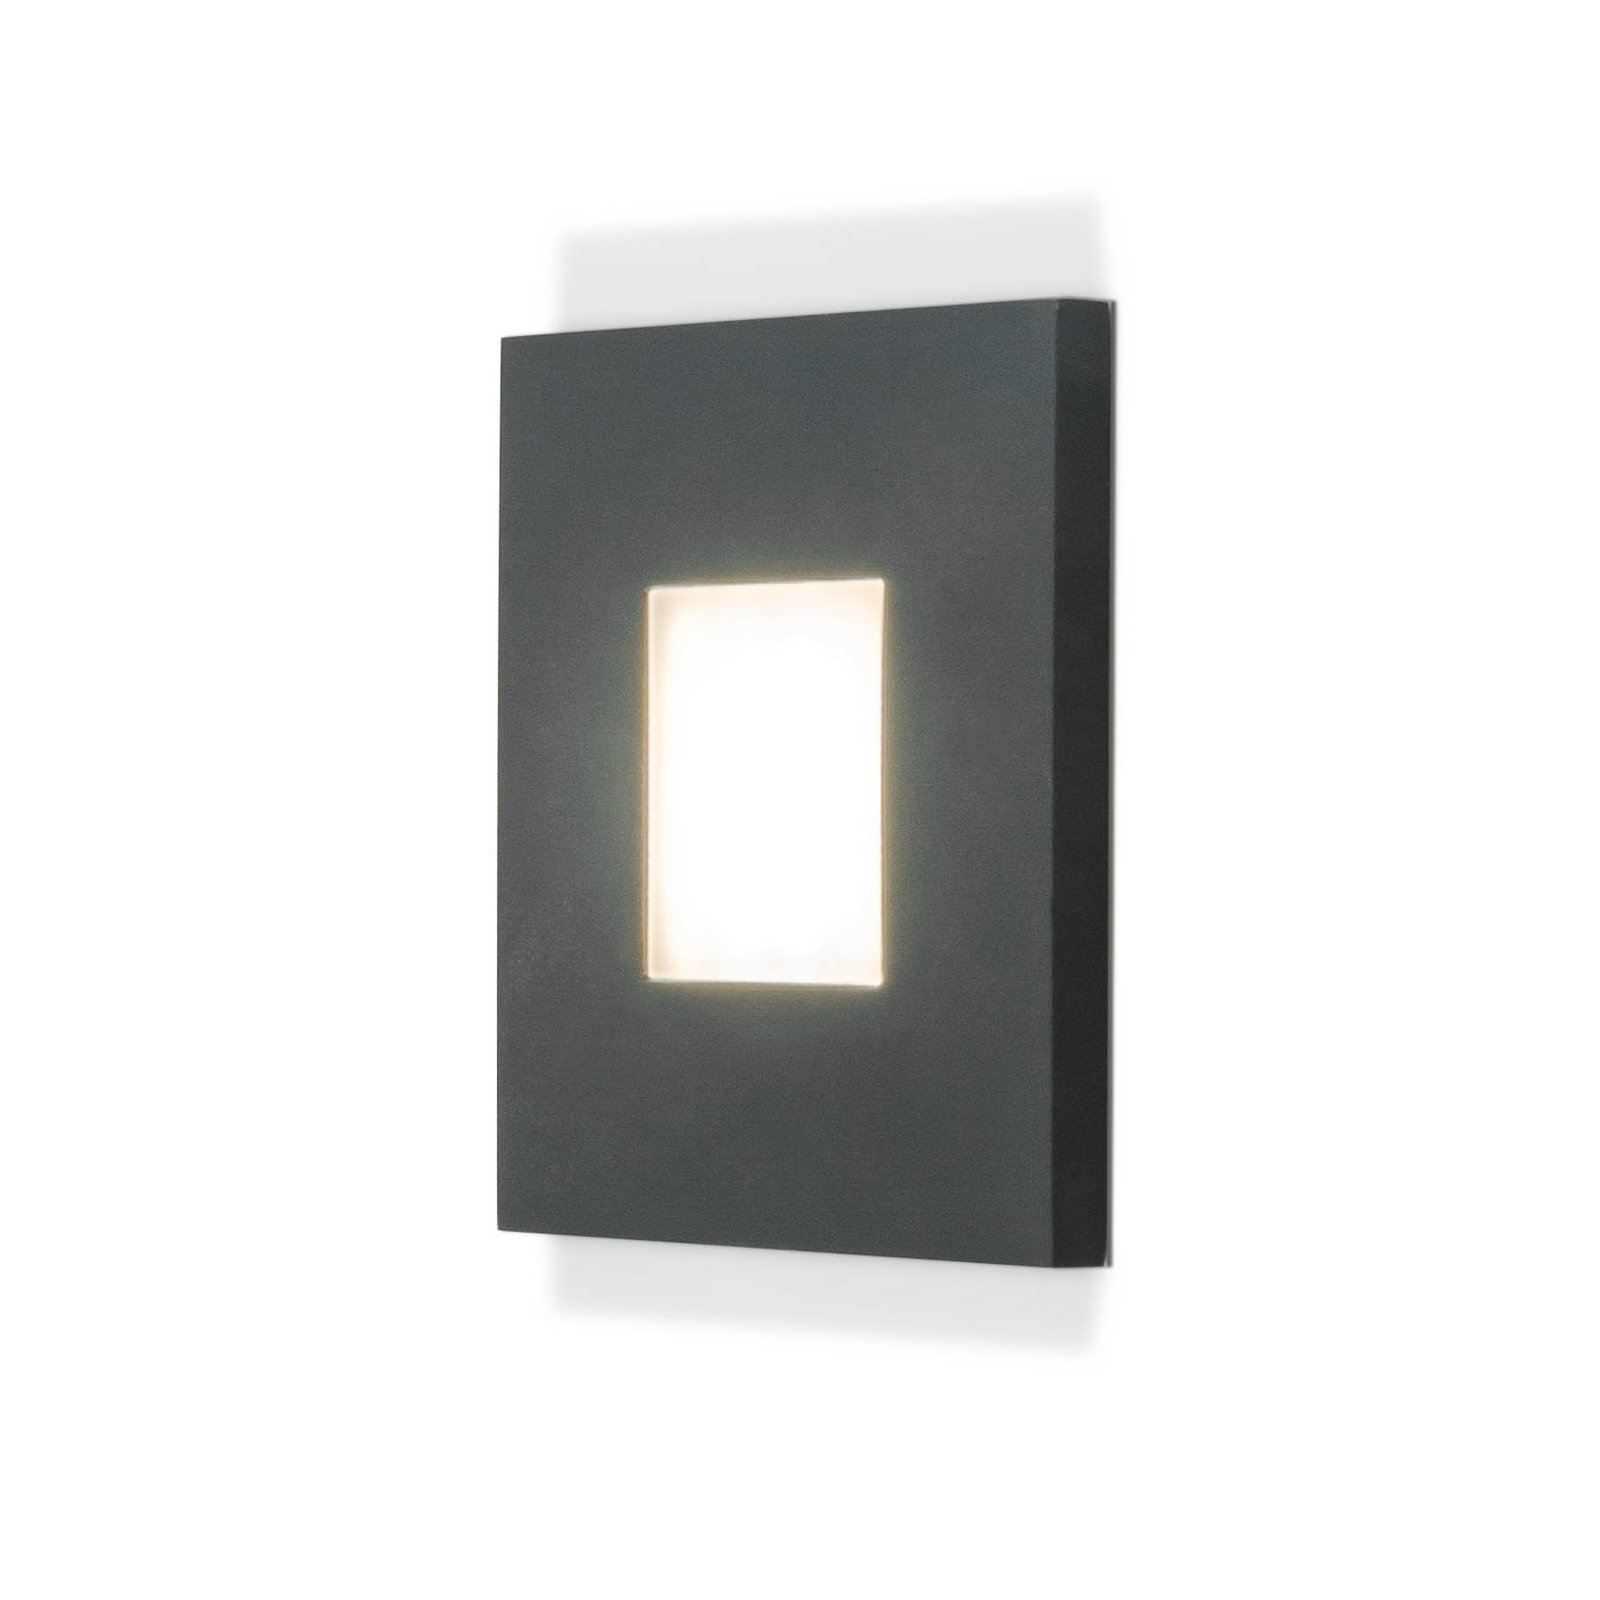 EVN LQ230 recessed wall light direct anthracite